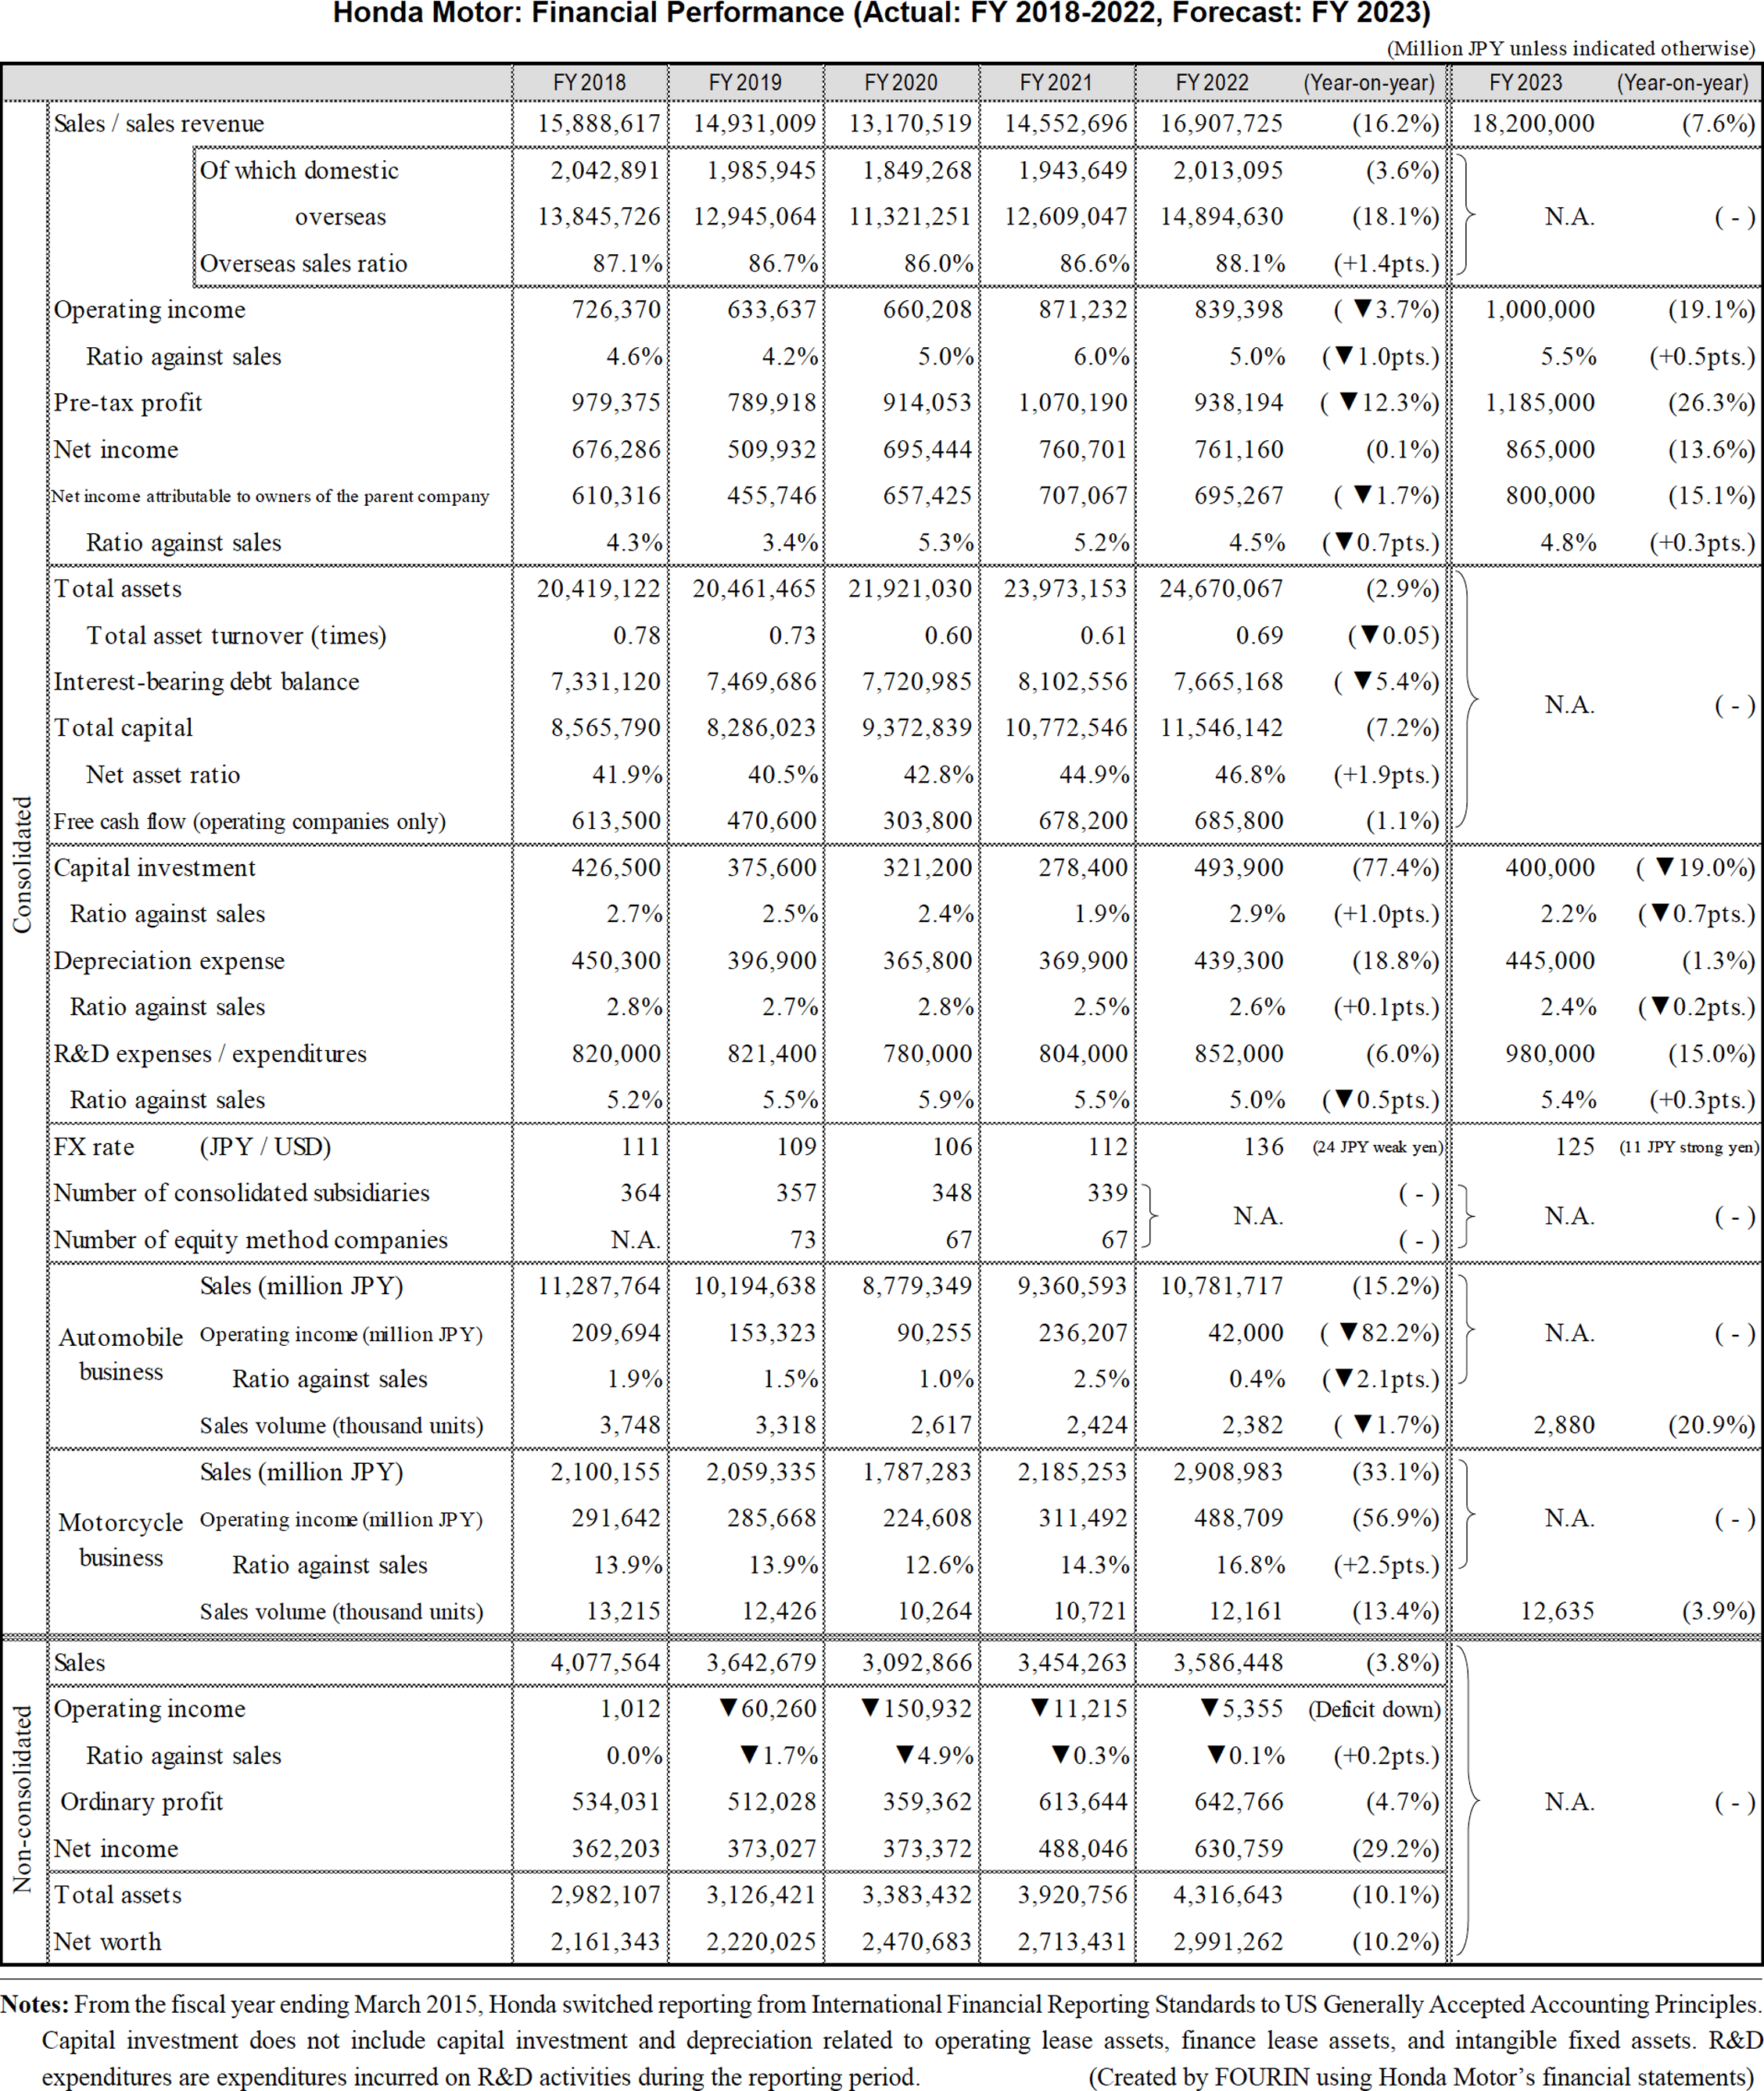 Table data: Honda Motor: Financial Performance (Actual: FY 2018-2022, Forecast: FY 2023)